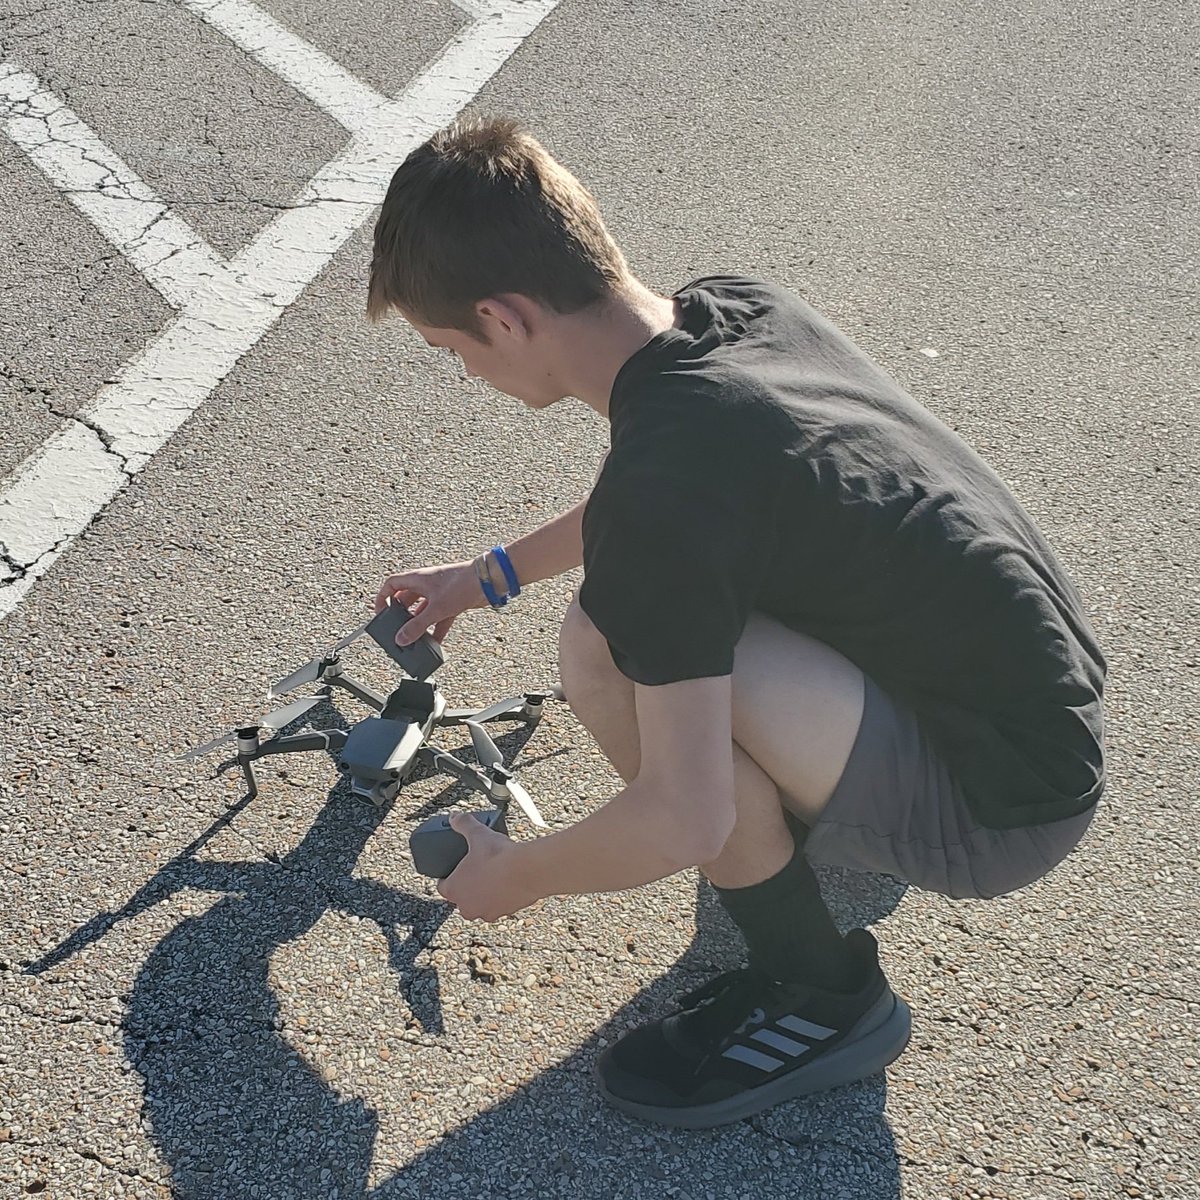 Taking a couple of my video production students outside this morning to learn drone piloting when it comes to filming effective aerial promo videos! #drones @TrinityAreaSD @TRINITY_MLUCAS @DonSnoke @thstrinitypride @DKnause5 @MrZebrasky